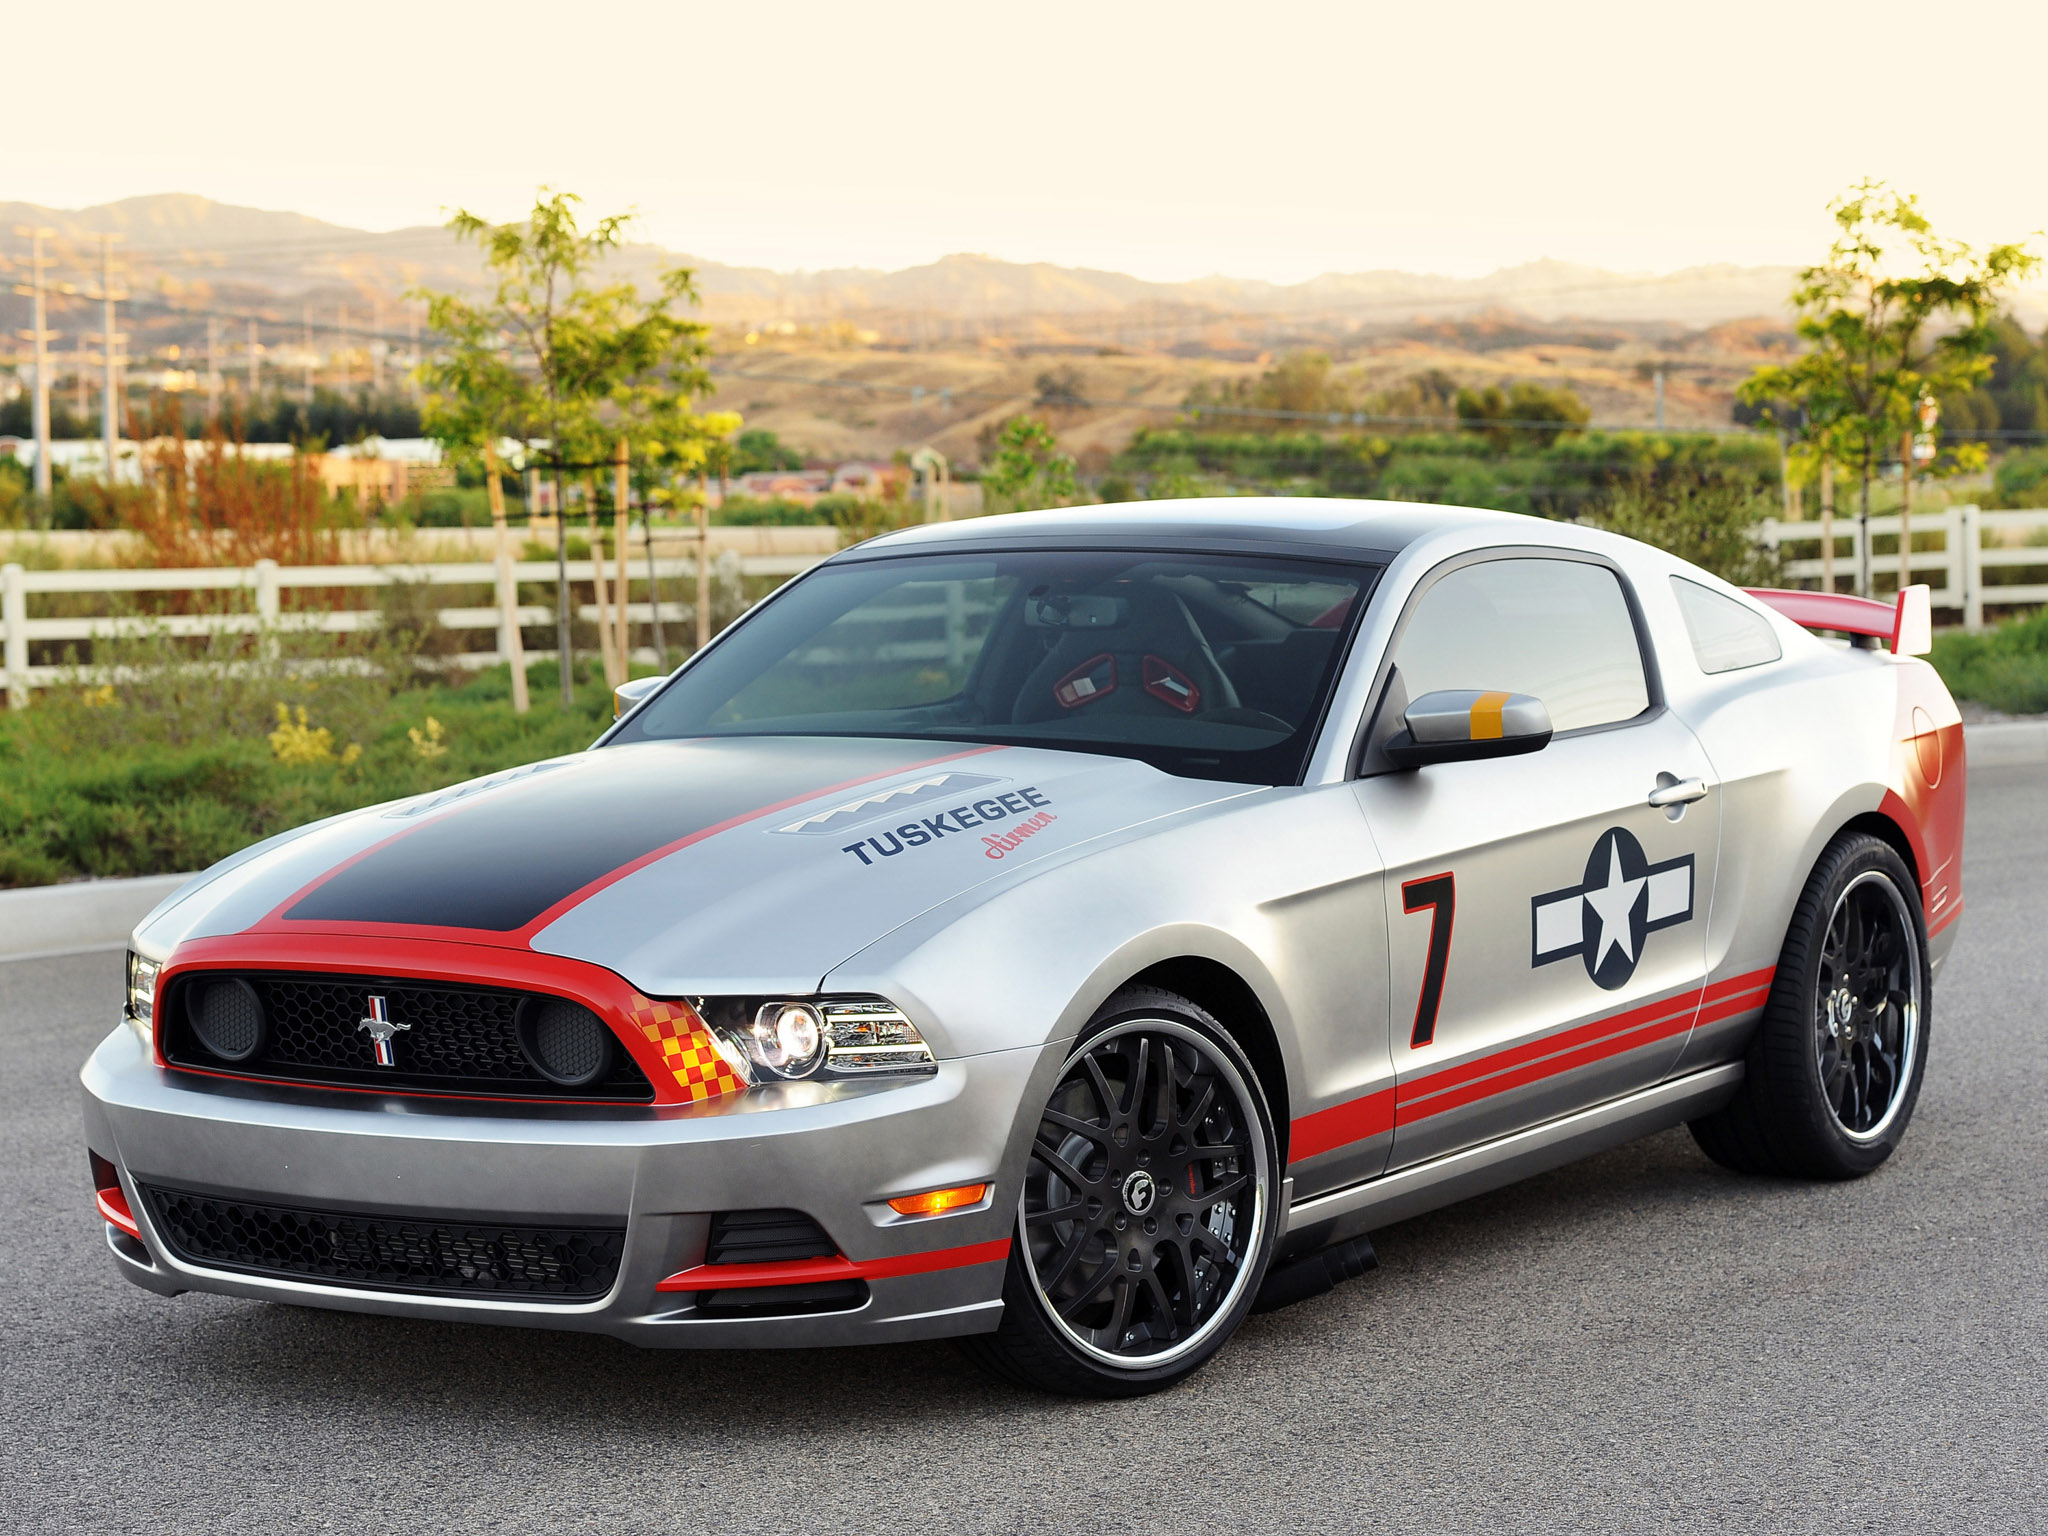 2013, Ford, Mustang, Gt, Red, Tails, Muscle, Tuning Wallpaper